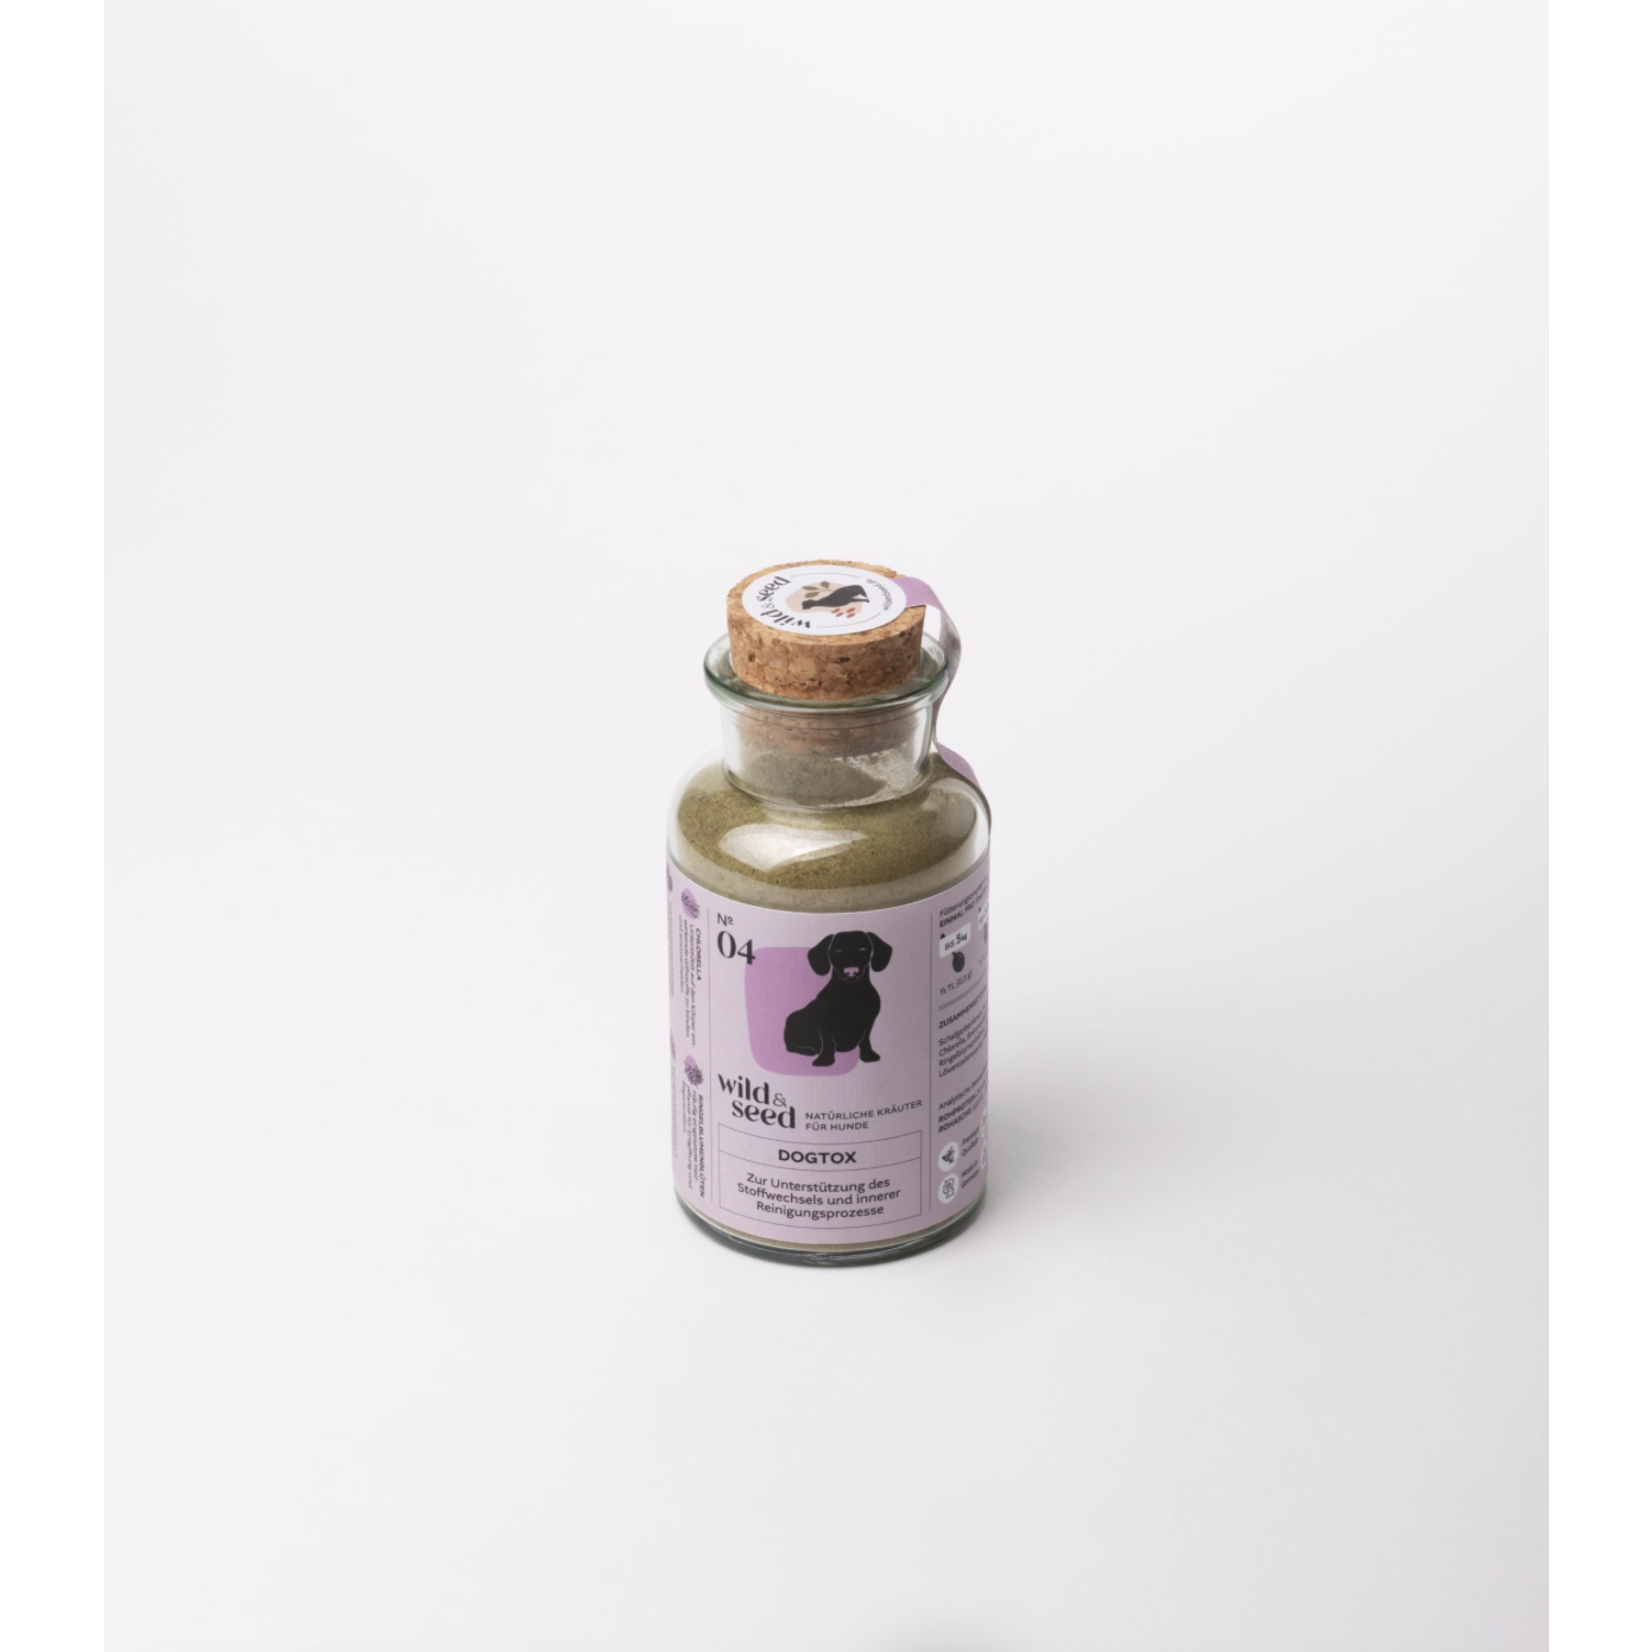 Pets best Wild & seed No4 dogtox